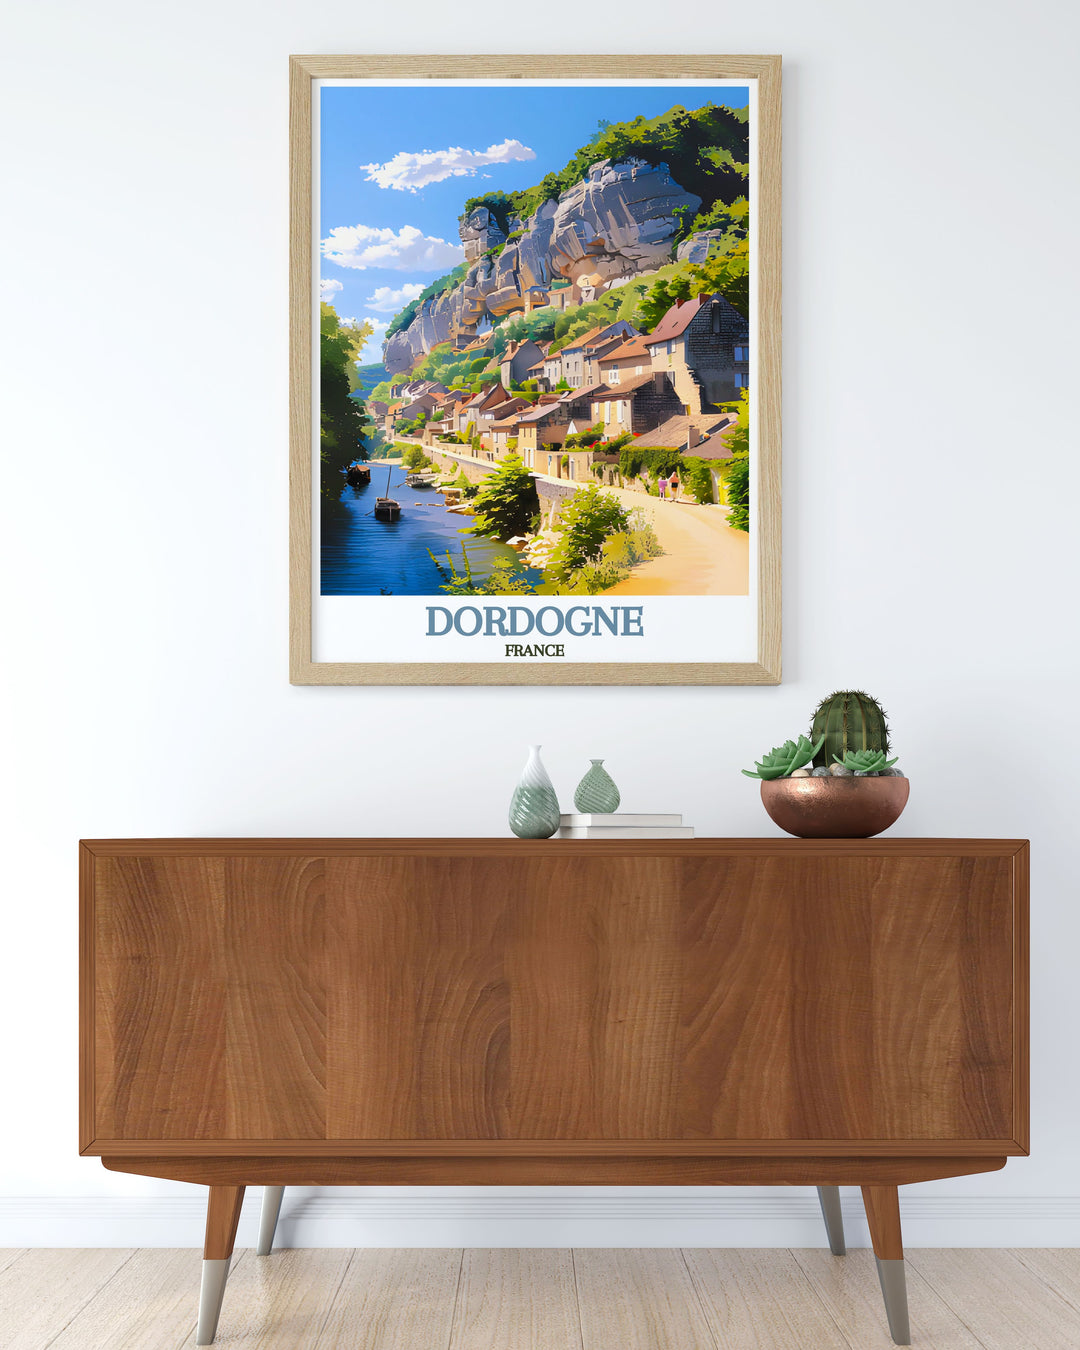 The serene beauty of La Roque Gageac in Dordogne is depicted in this poster, offering a glimpse into the villages tranquil environment and picturesque views.